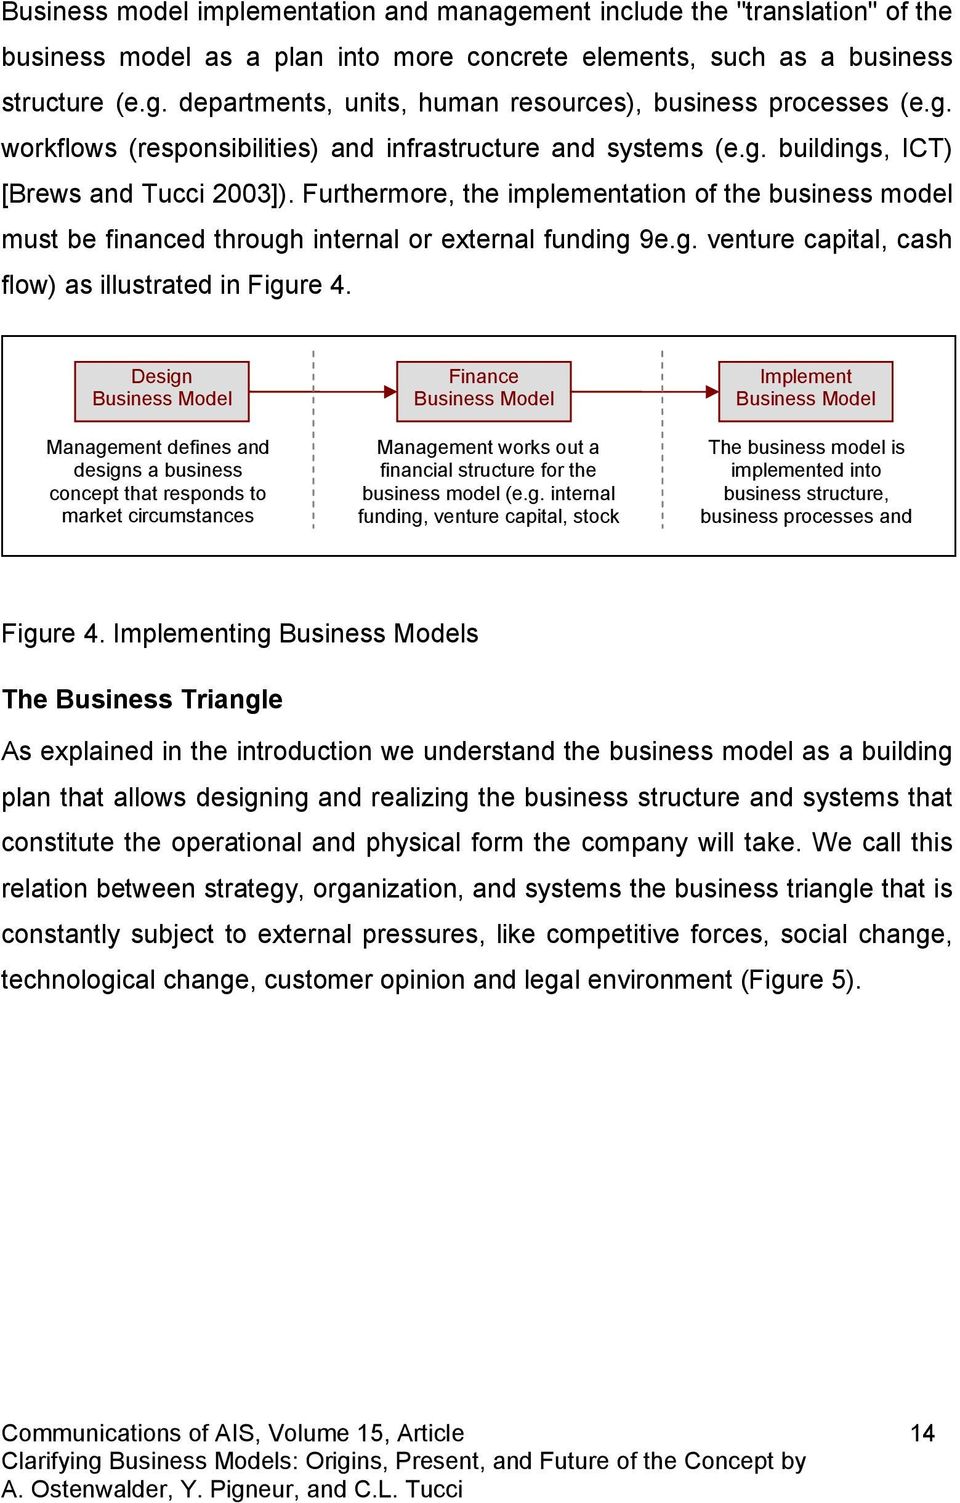 Clarifying Business Models Origins Present And Future Of The Concept